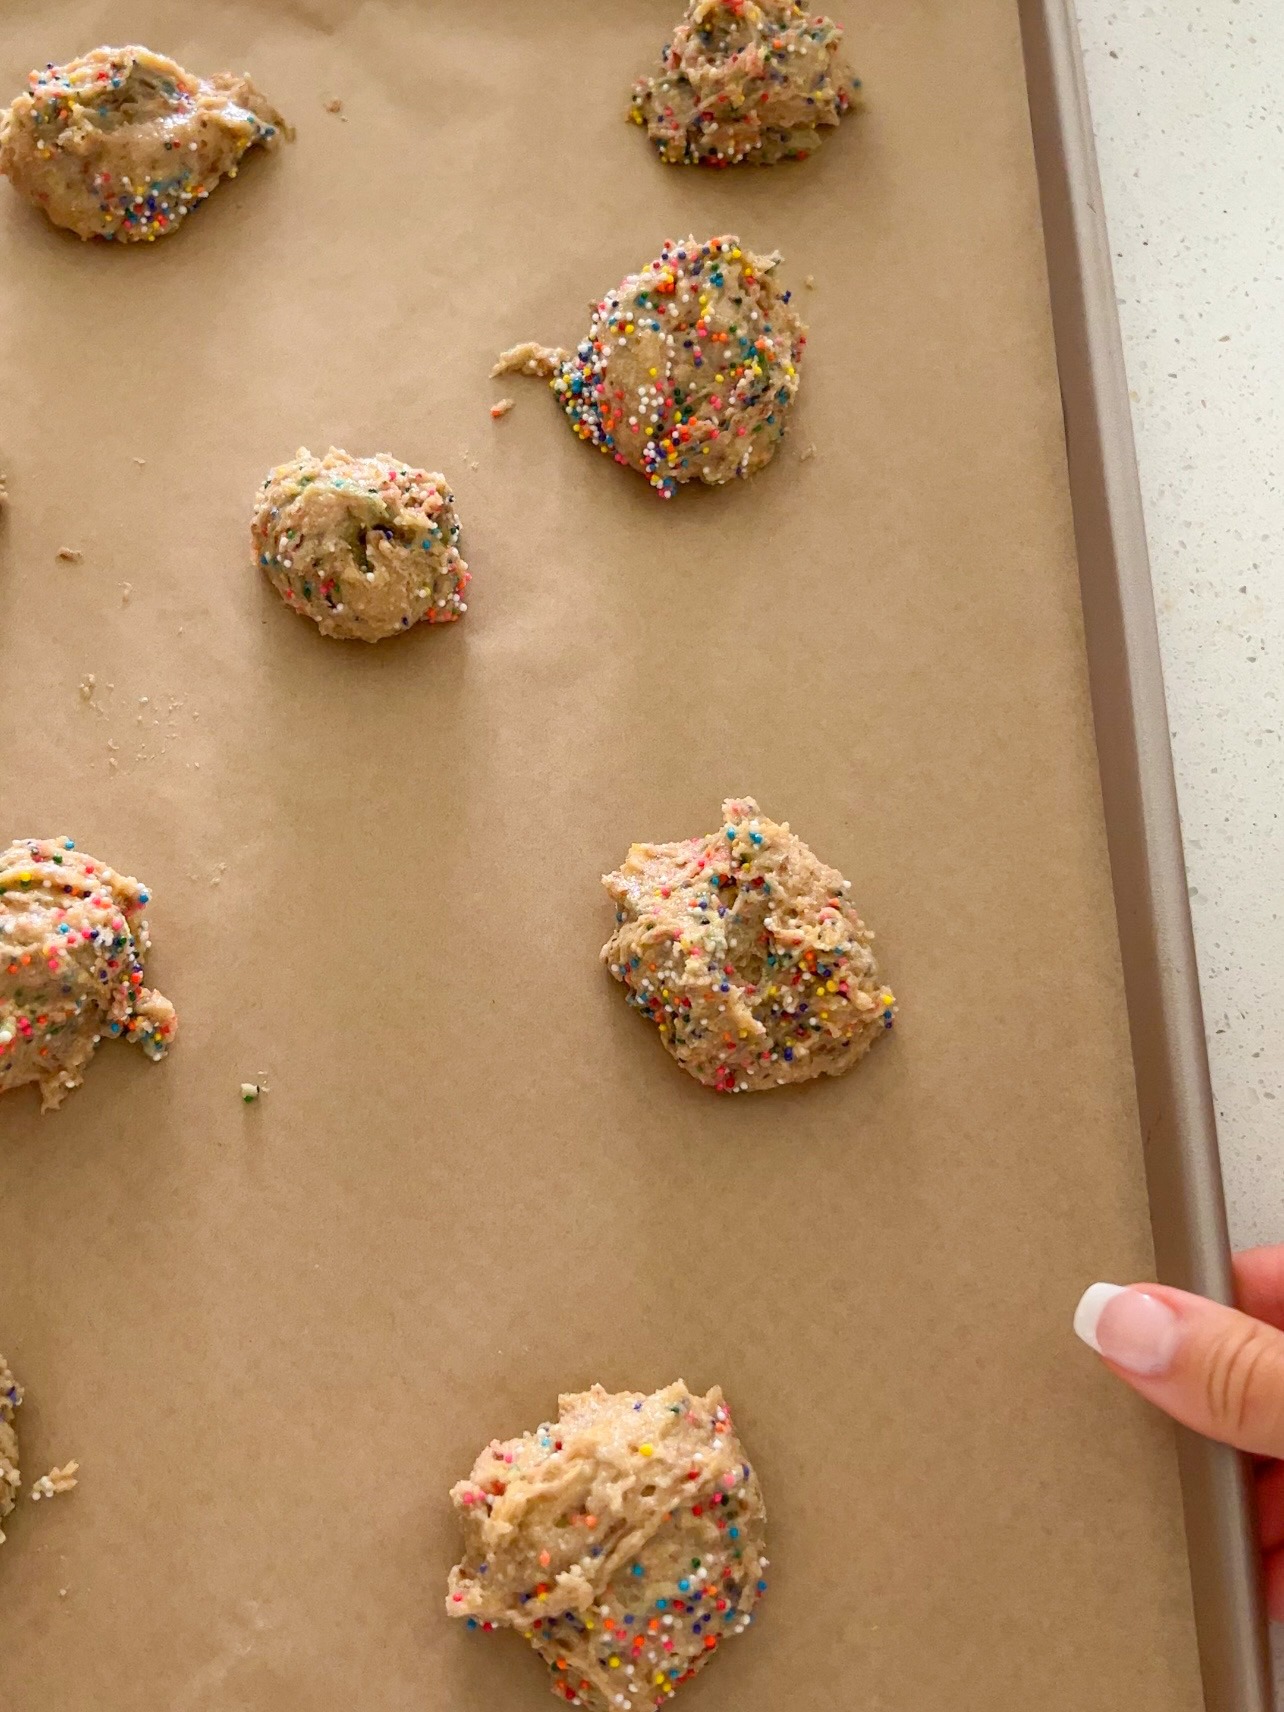 Placing cookie dough on a baking sheet lined with parchment paper.